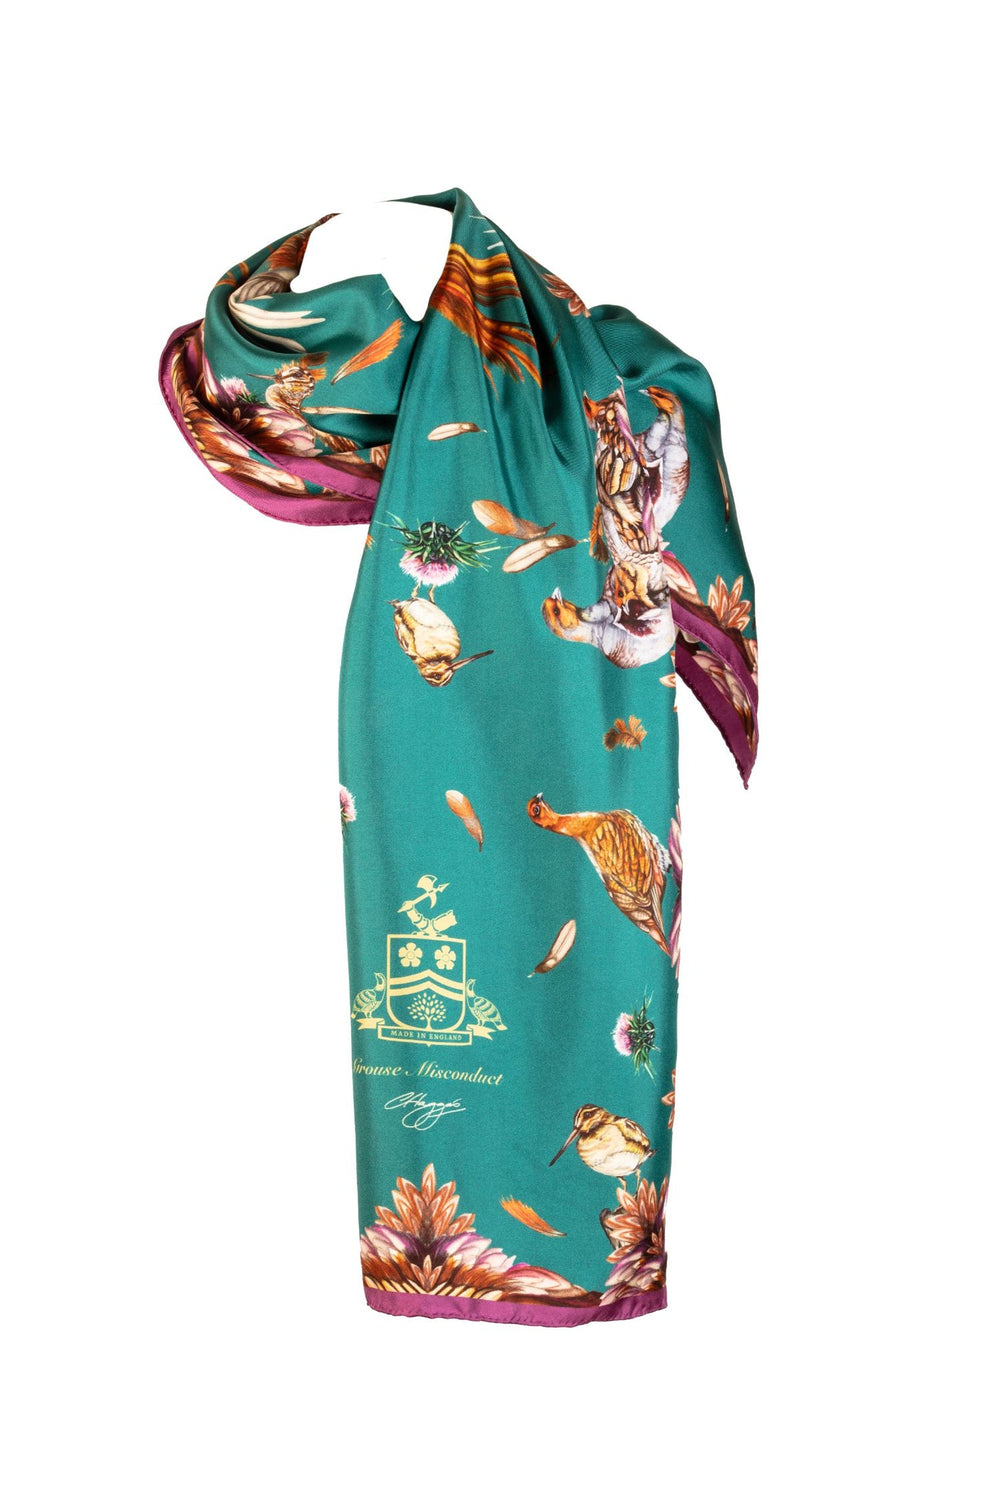 Classic Grouse Misconduct Silk Scarf Teal & Aubergine